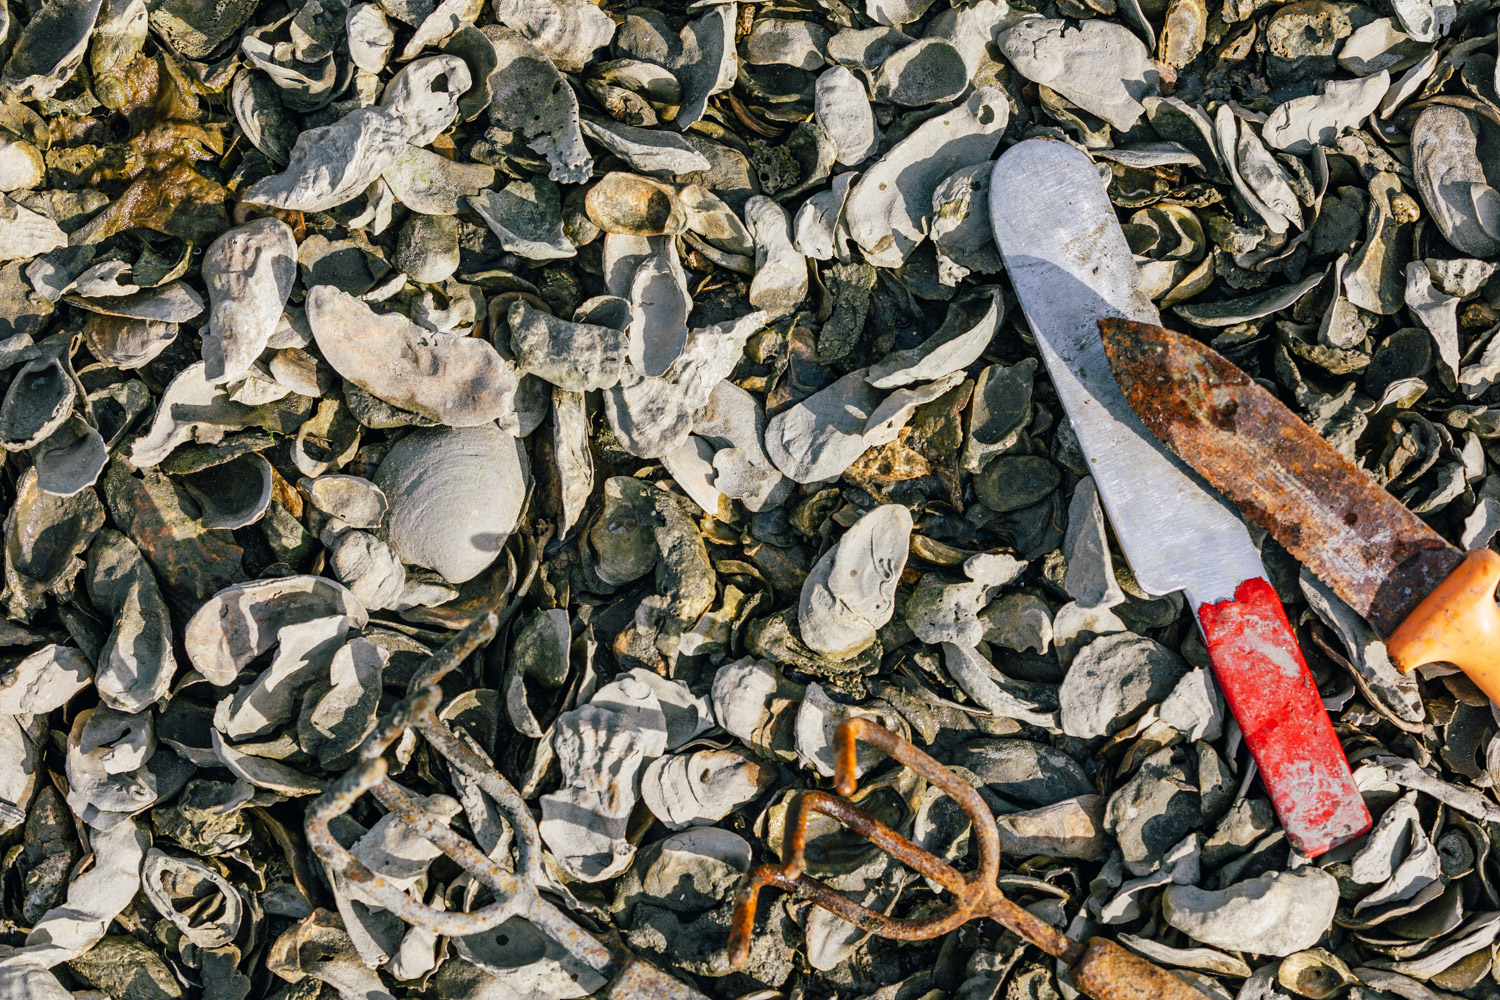 Two shelling tools sit on top of a huge pile of oysters and shells.